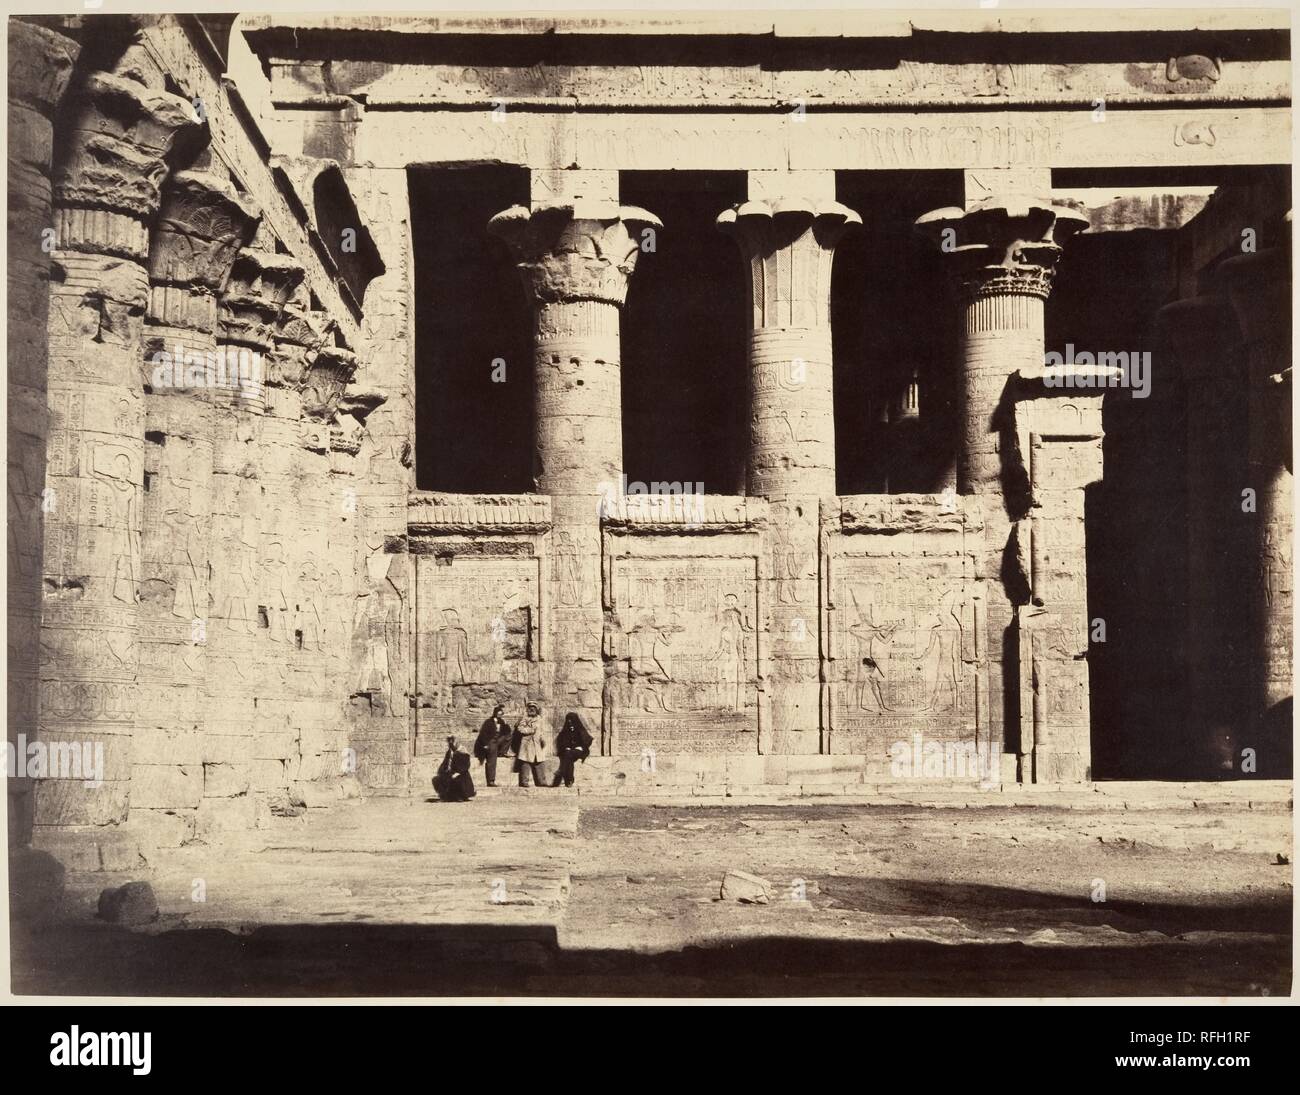 Temple of Edfu. Artist: Gustave Le Gray (French, 1820-1884). Dimensions: Image: 31.4 x 41 cm (12 3/8 x 16 1/8 in.)  Mount: 50.1 x 64.6 cm (19 3/4 x 25 7/16 in.). Date: 1867.  This photograph, taken in the great court of the Temple of Horus at Edfu, shows members of the party accompanying the sons of Egypt's viceroy Ismacil Pasha on their voyage through the country. The Temple of Edfu, built by the Ptolemy dynasty between 237 and 57 B.C., is the best preserved of all Egyptian temples. It had remained buried in the sands until it was cleared by the archaeologist Auguste Mariette in 1859. It is t Stock Photo